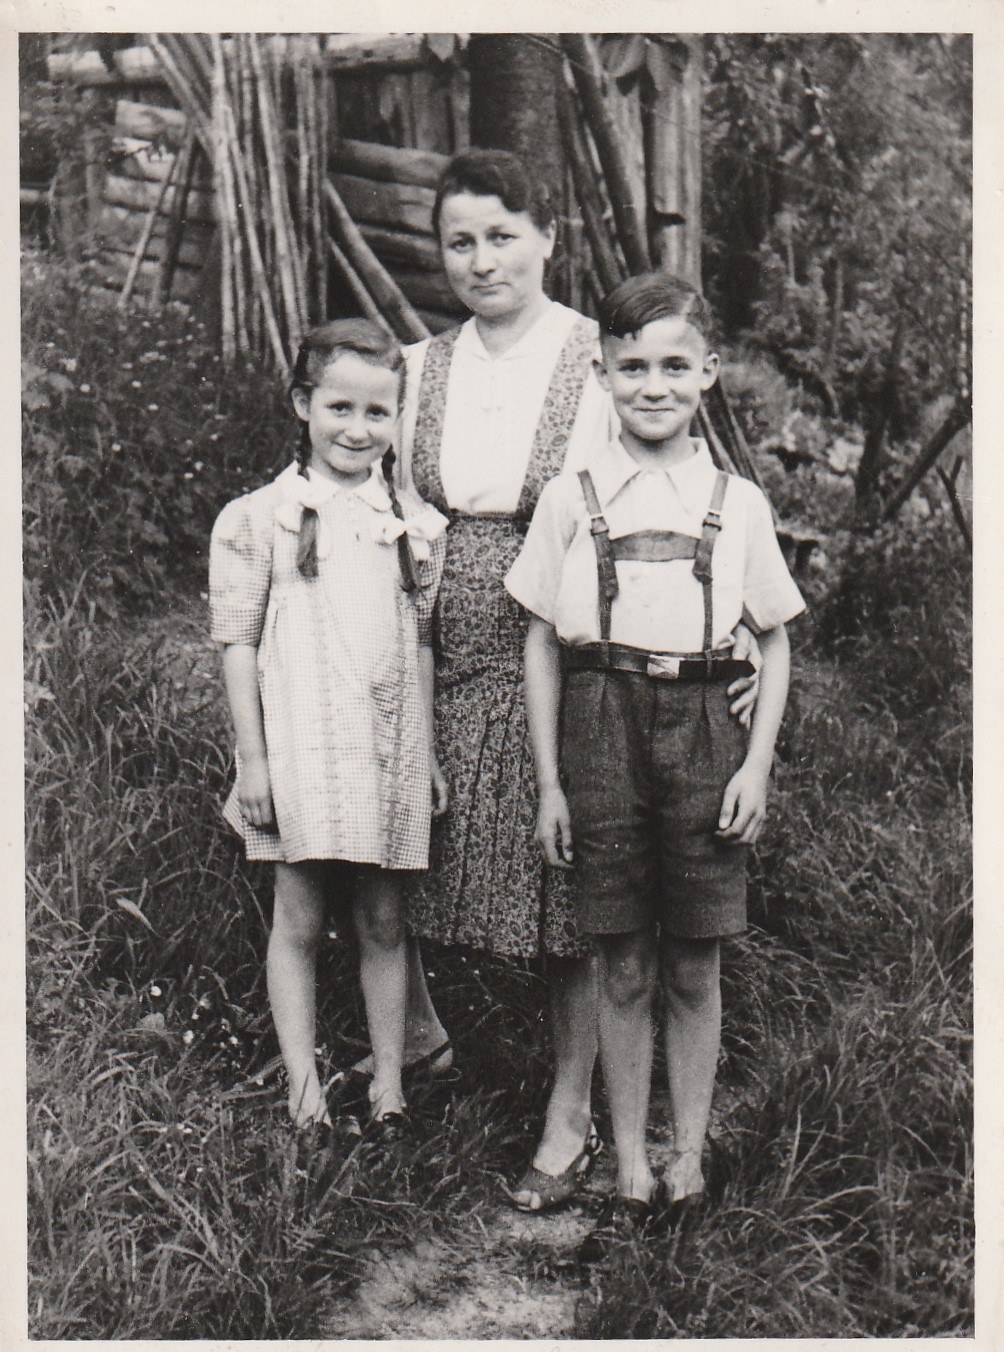 This photo of my brother, my mother and me, was taken shortly after the Second World War.